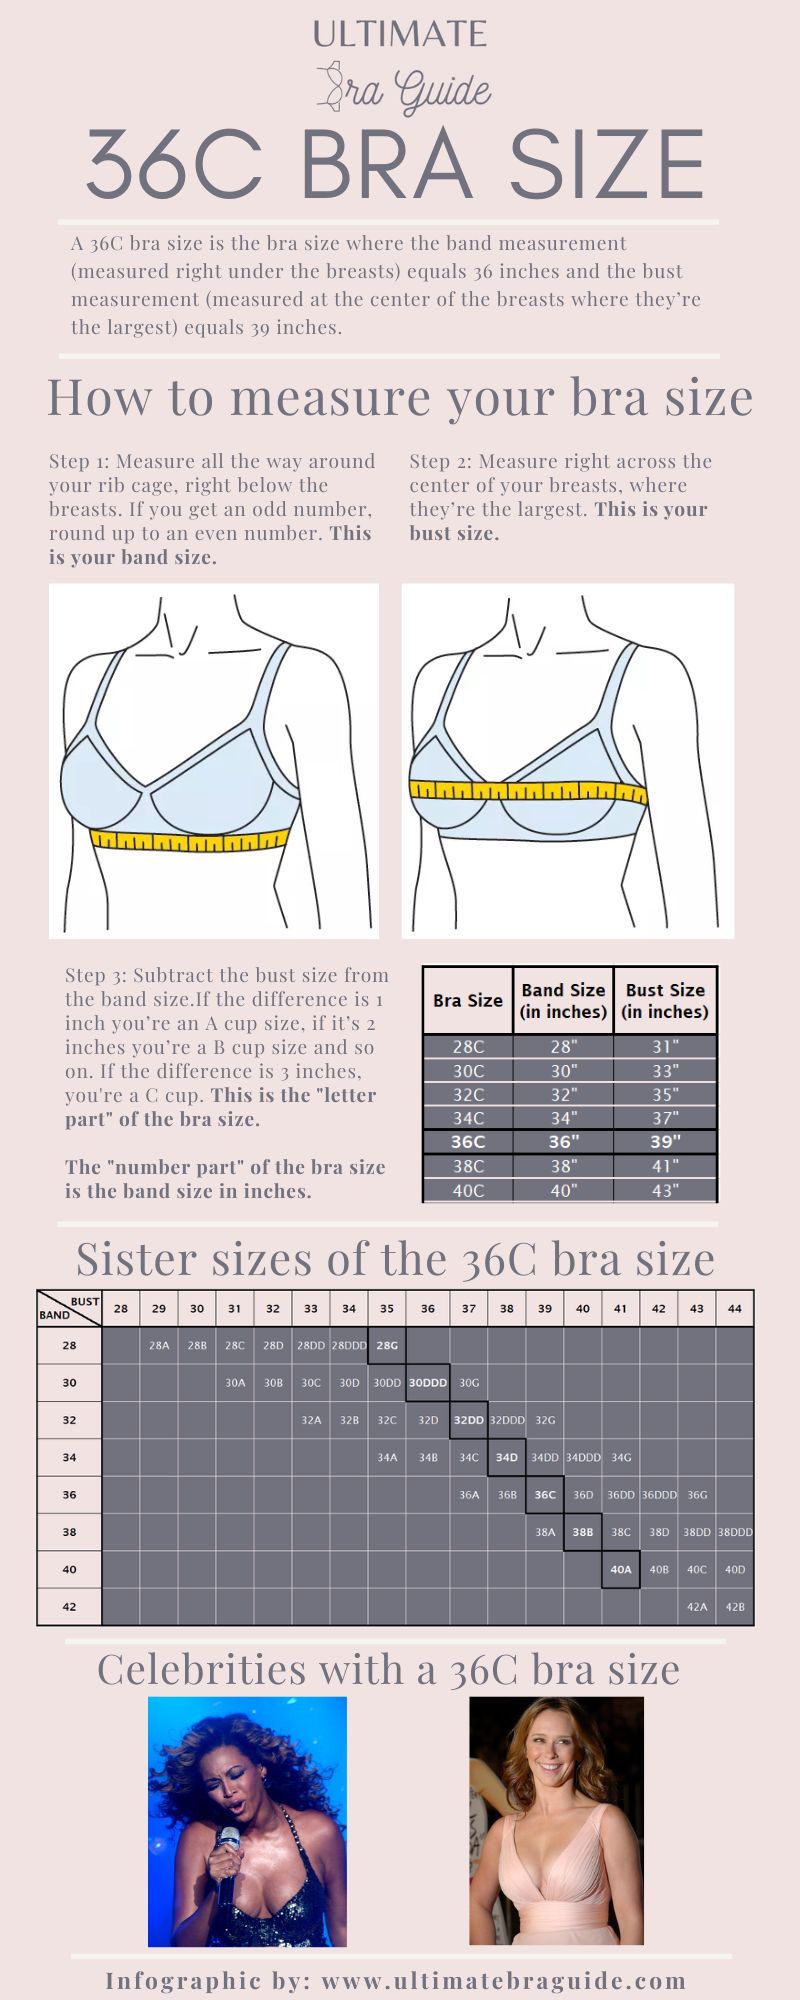 An infographic all about the 36C bra size - what it is, how to measure if you're 36C bra size, 36C bra sister sizes, 36C cup examples, and so on